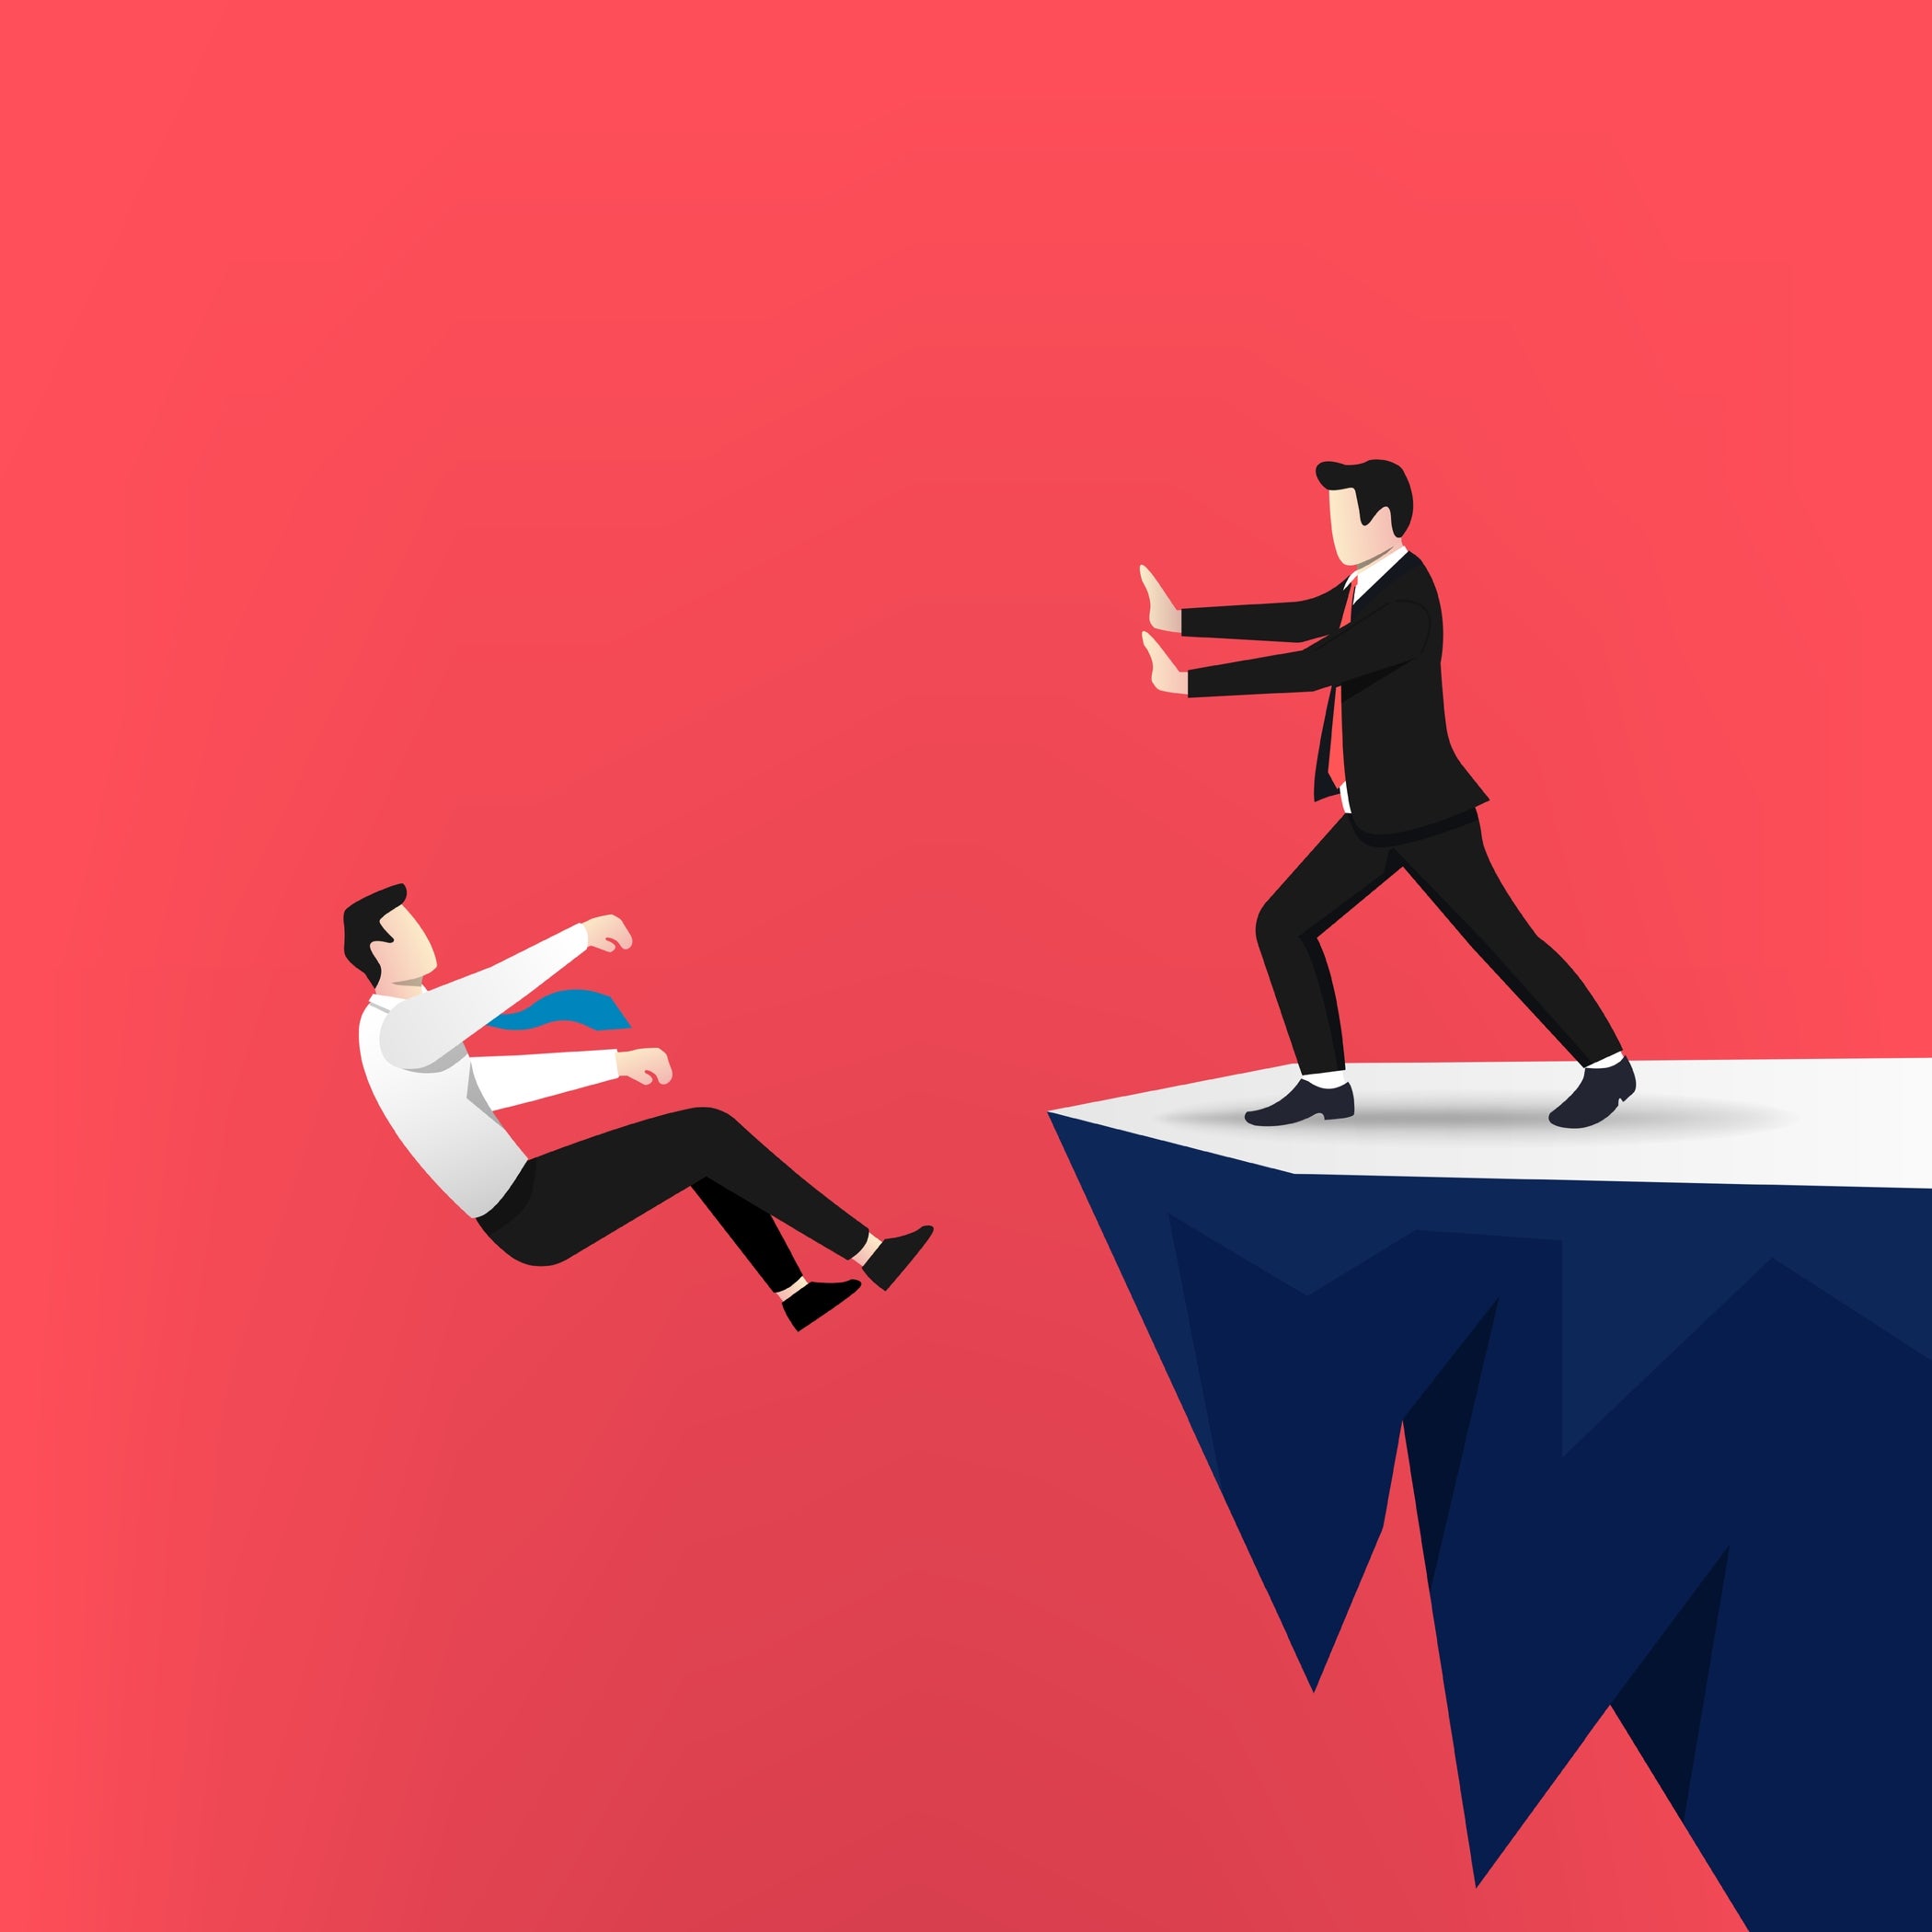 Businessman pushing other businessman off cliff displaying unethical concept.